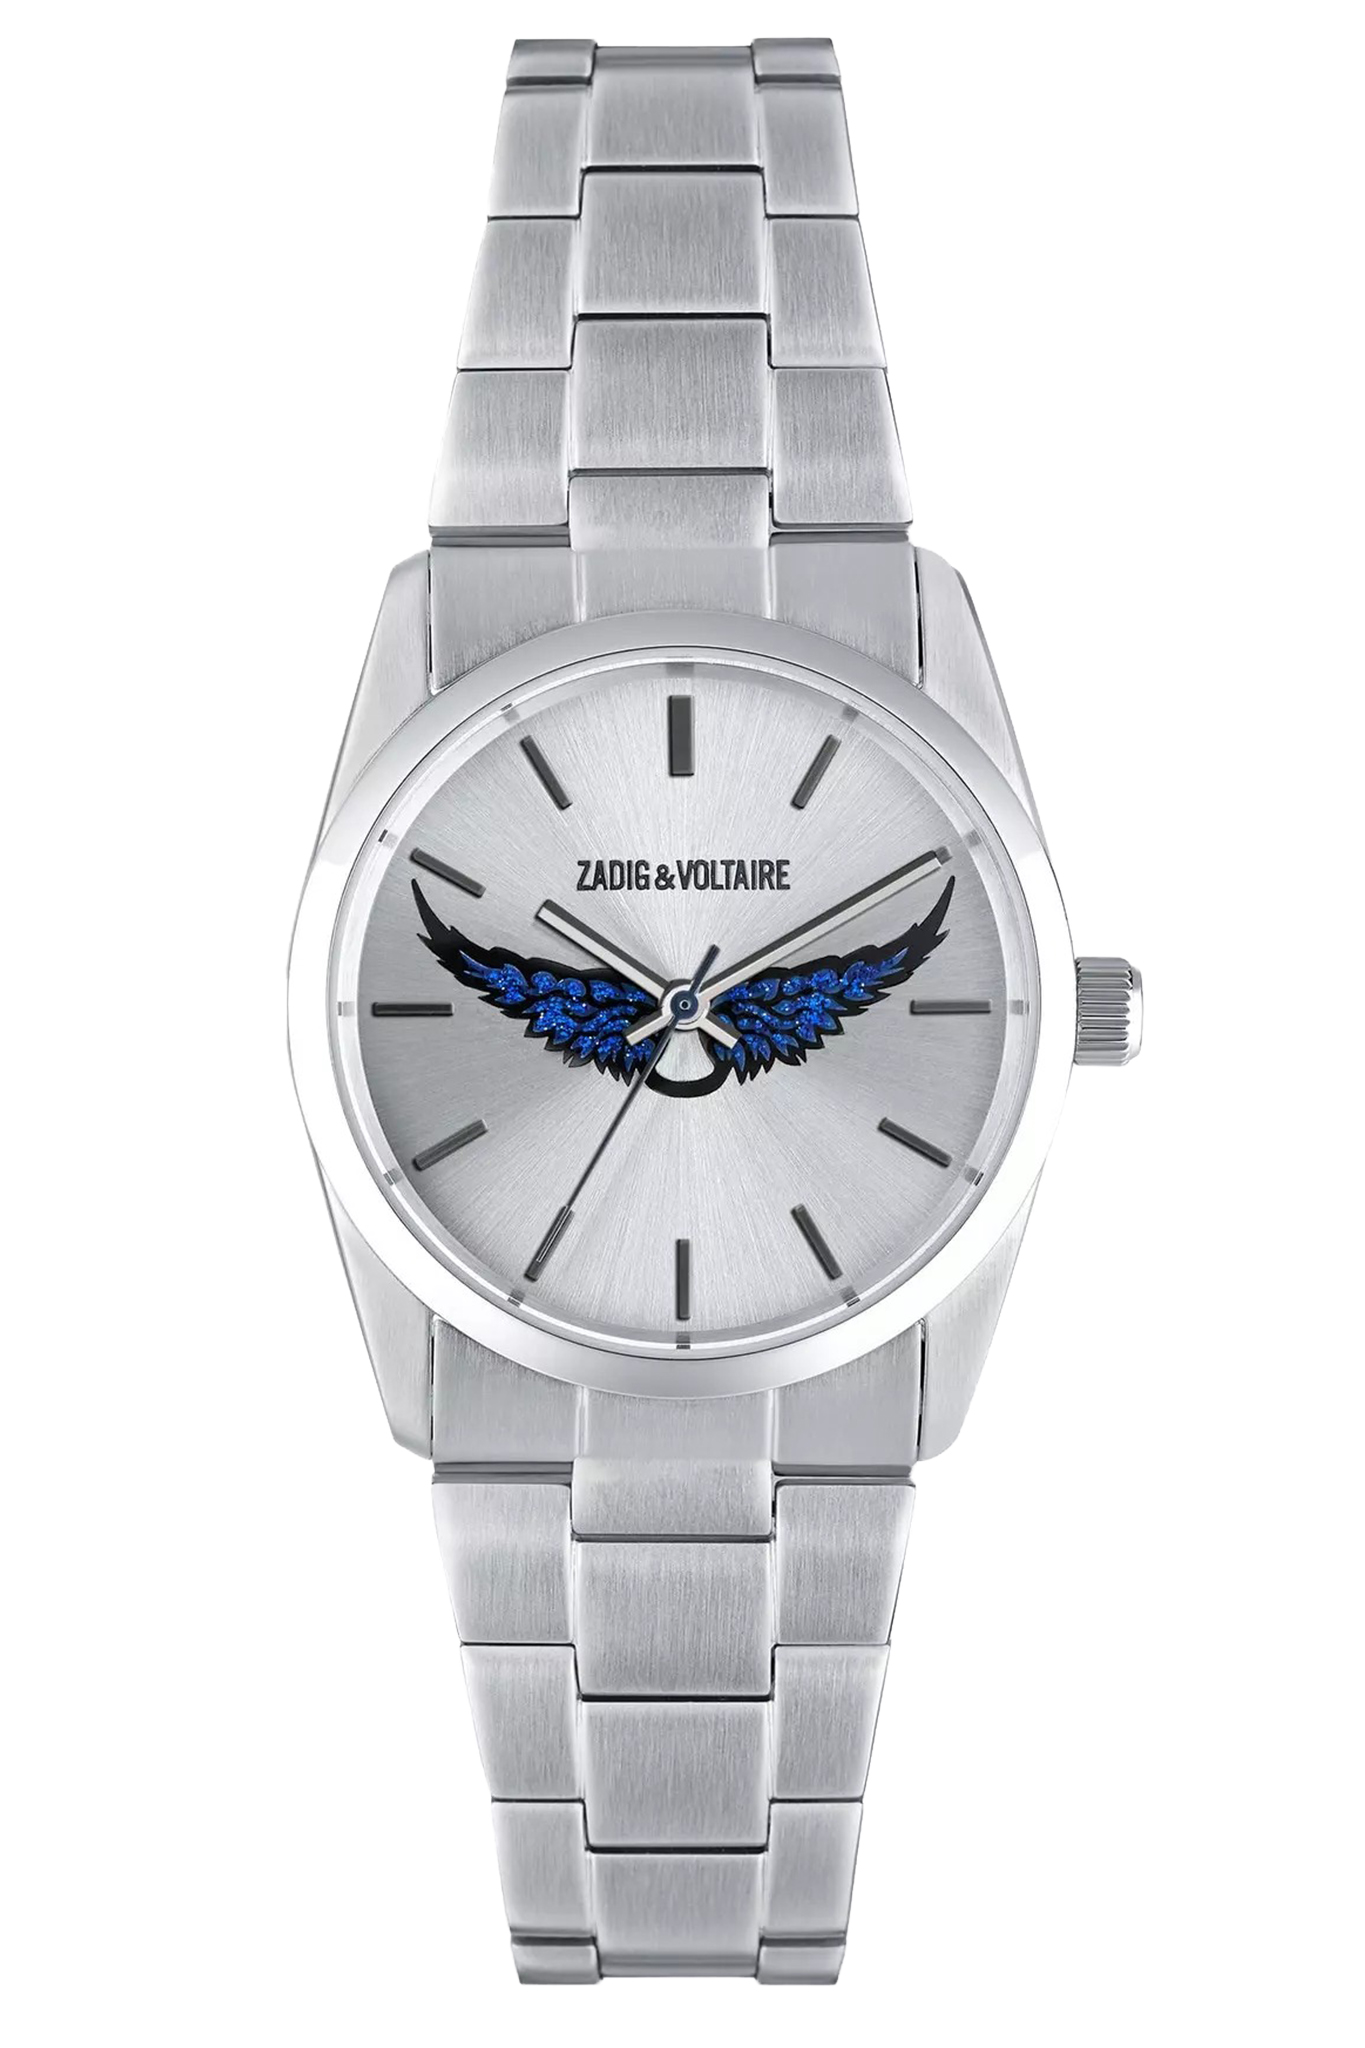 MONTRE_ZADIG_VOLTAIRE_TIMELESS_AILES_FOND_BLANC_190